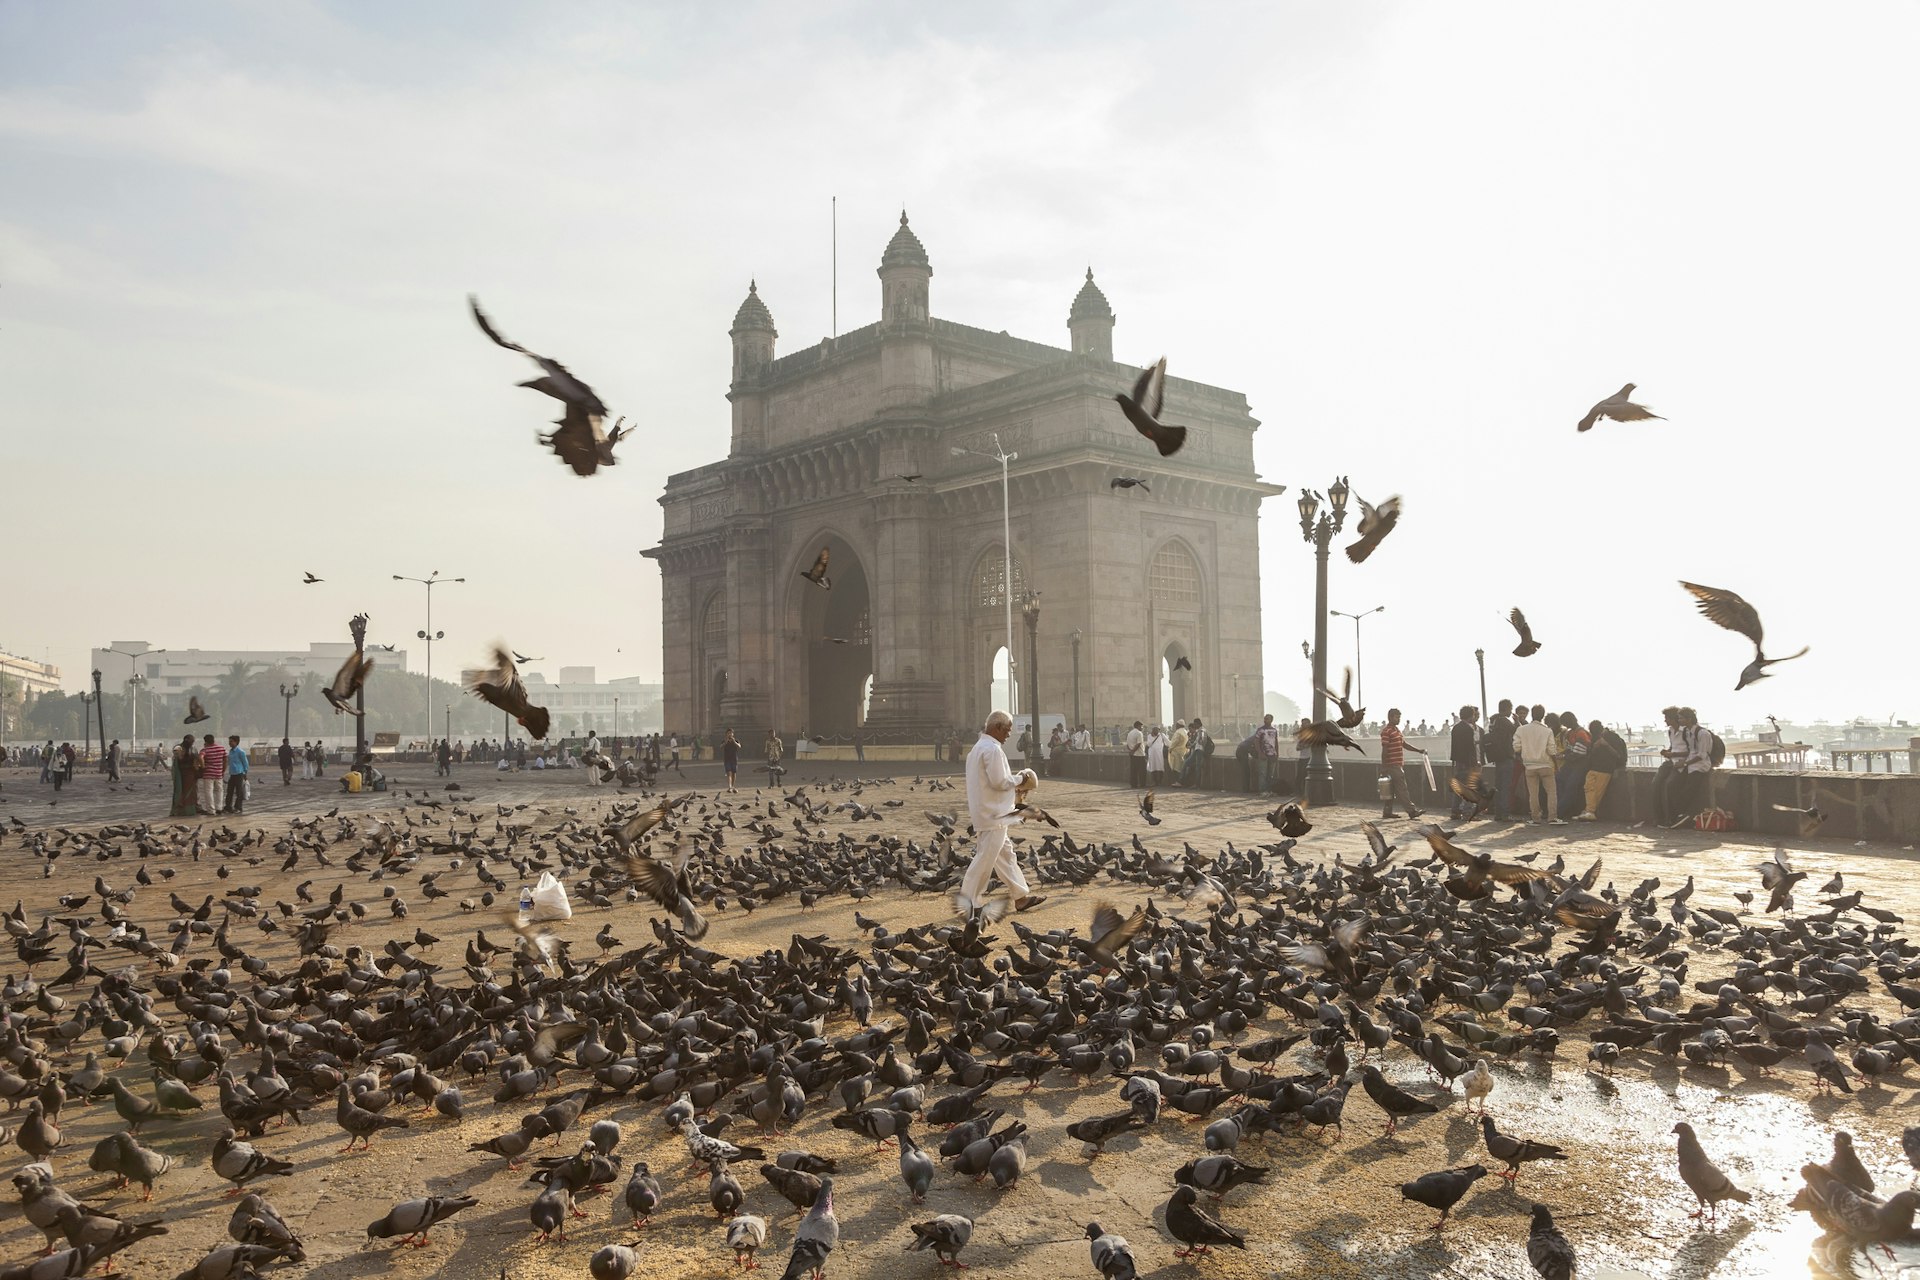 Pigeons fly from the floor in front of the India Gate, Mumbai as a man in all white walks through them